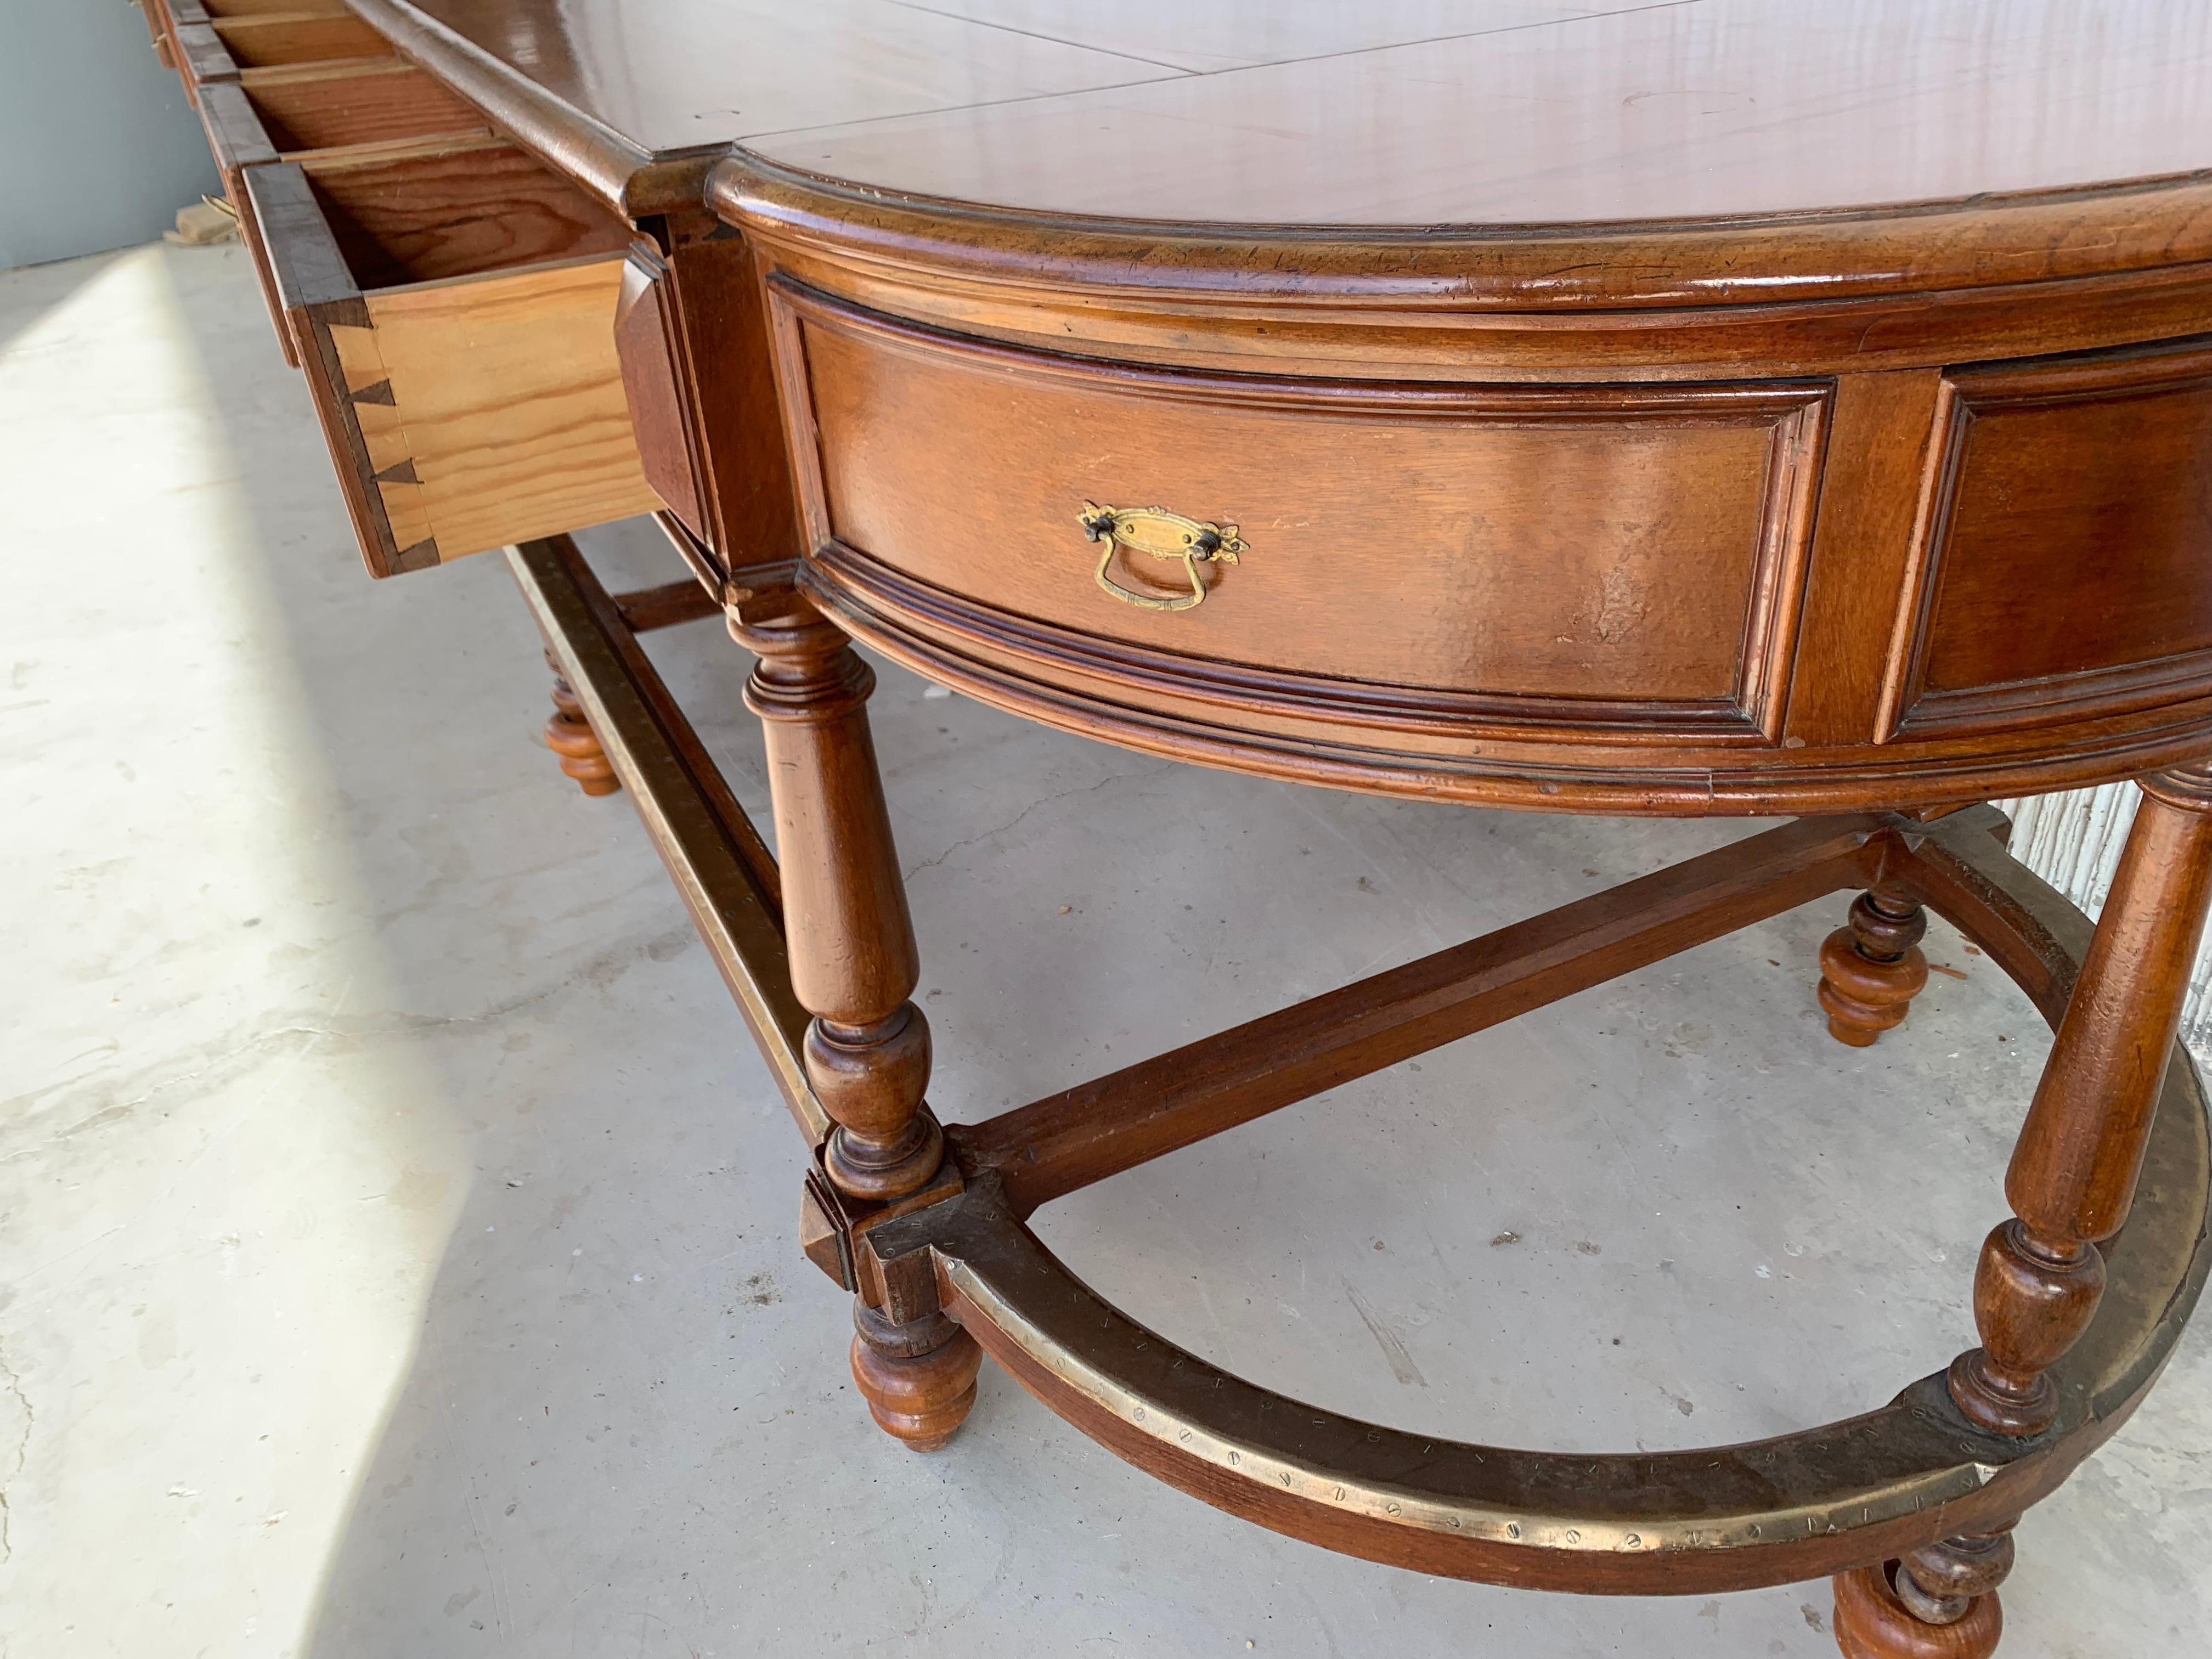 12 Foot Oval Center Table with Drawers in Both Sides, 20th Century For Sale 6